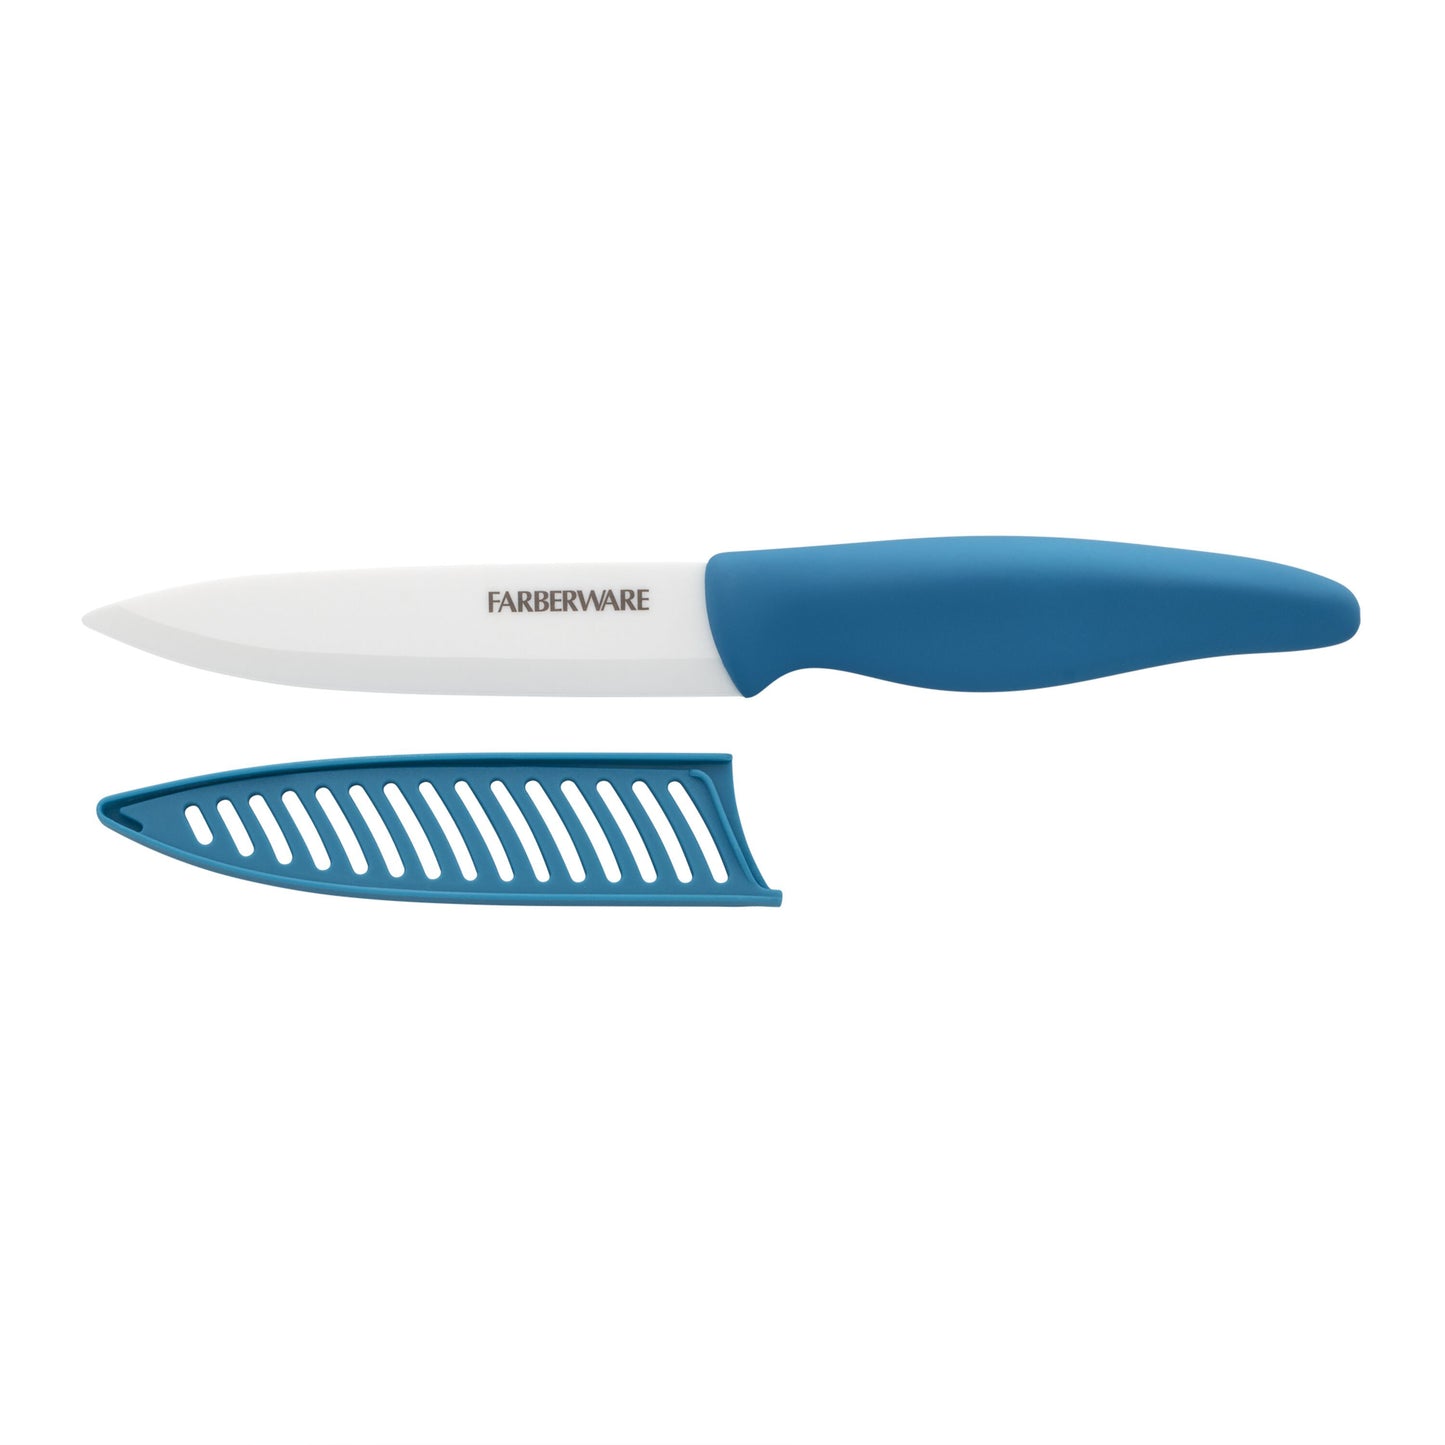 Farberware Professional 5-inch Ceramic Utility Knife with Teal Blade Cover and Handle